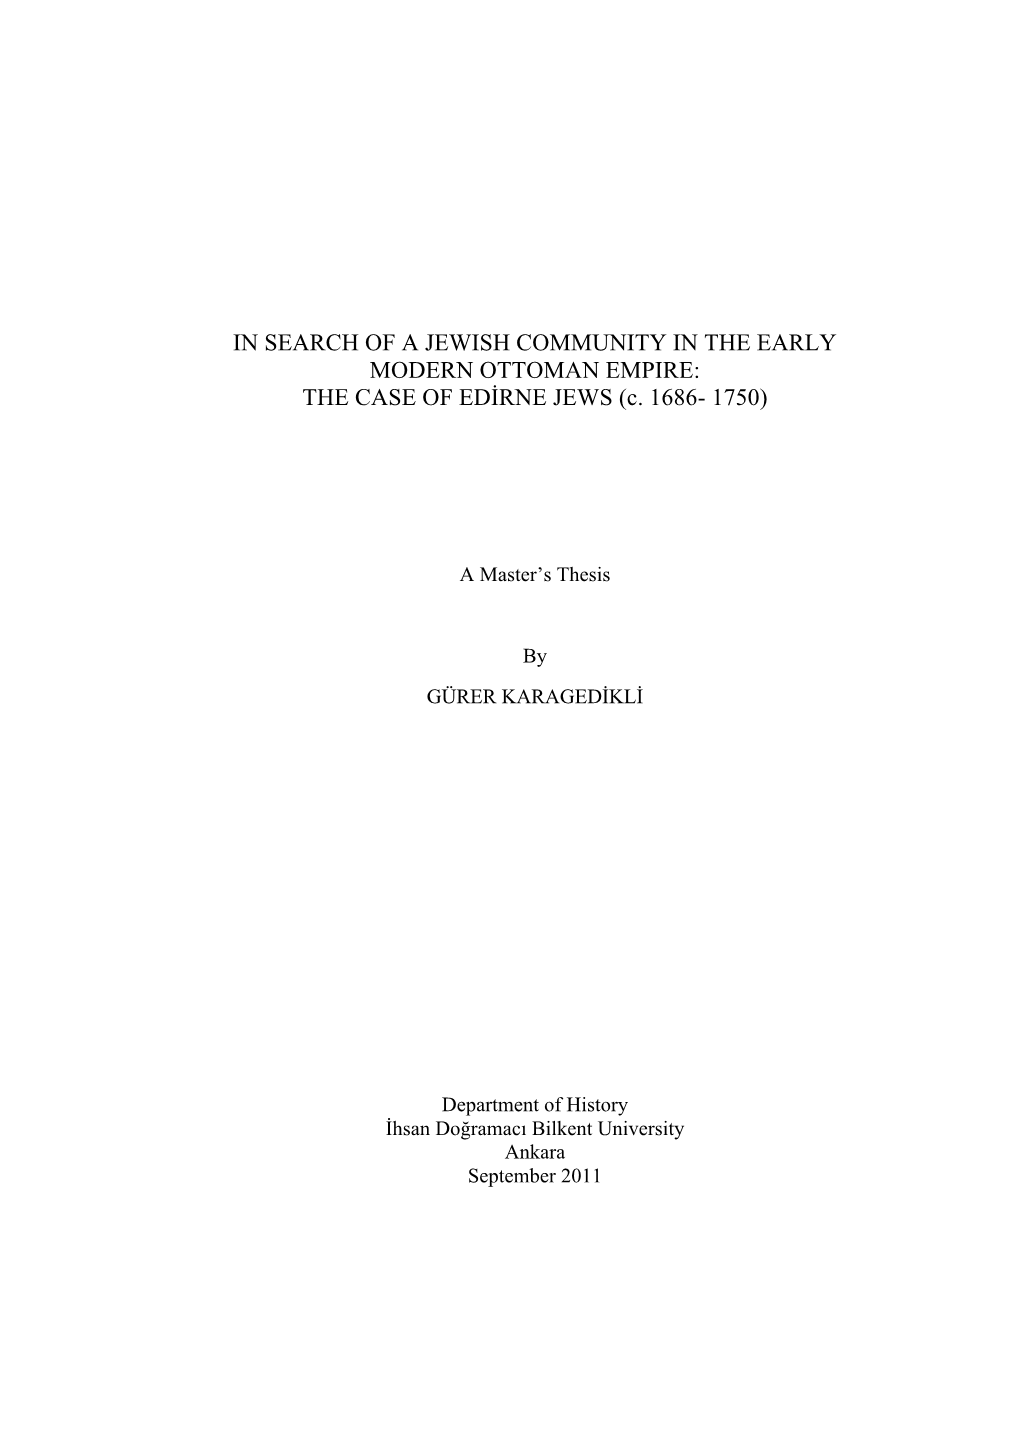 IN SEARCH of a JEWISH COMMUNITY in the EARLY MODERN OTTOMAN EMPIRE: the CASE of EDİRNE JEWS (C